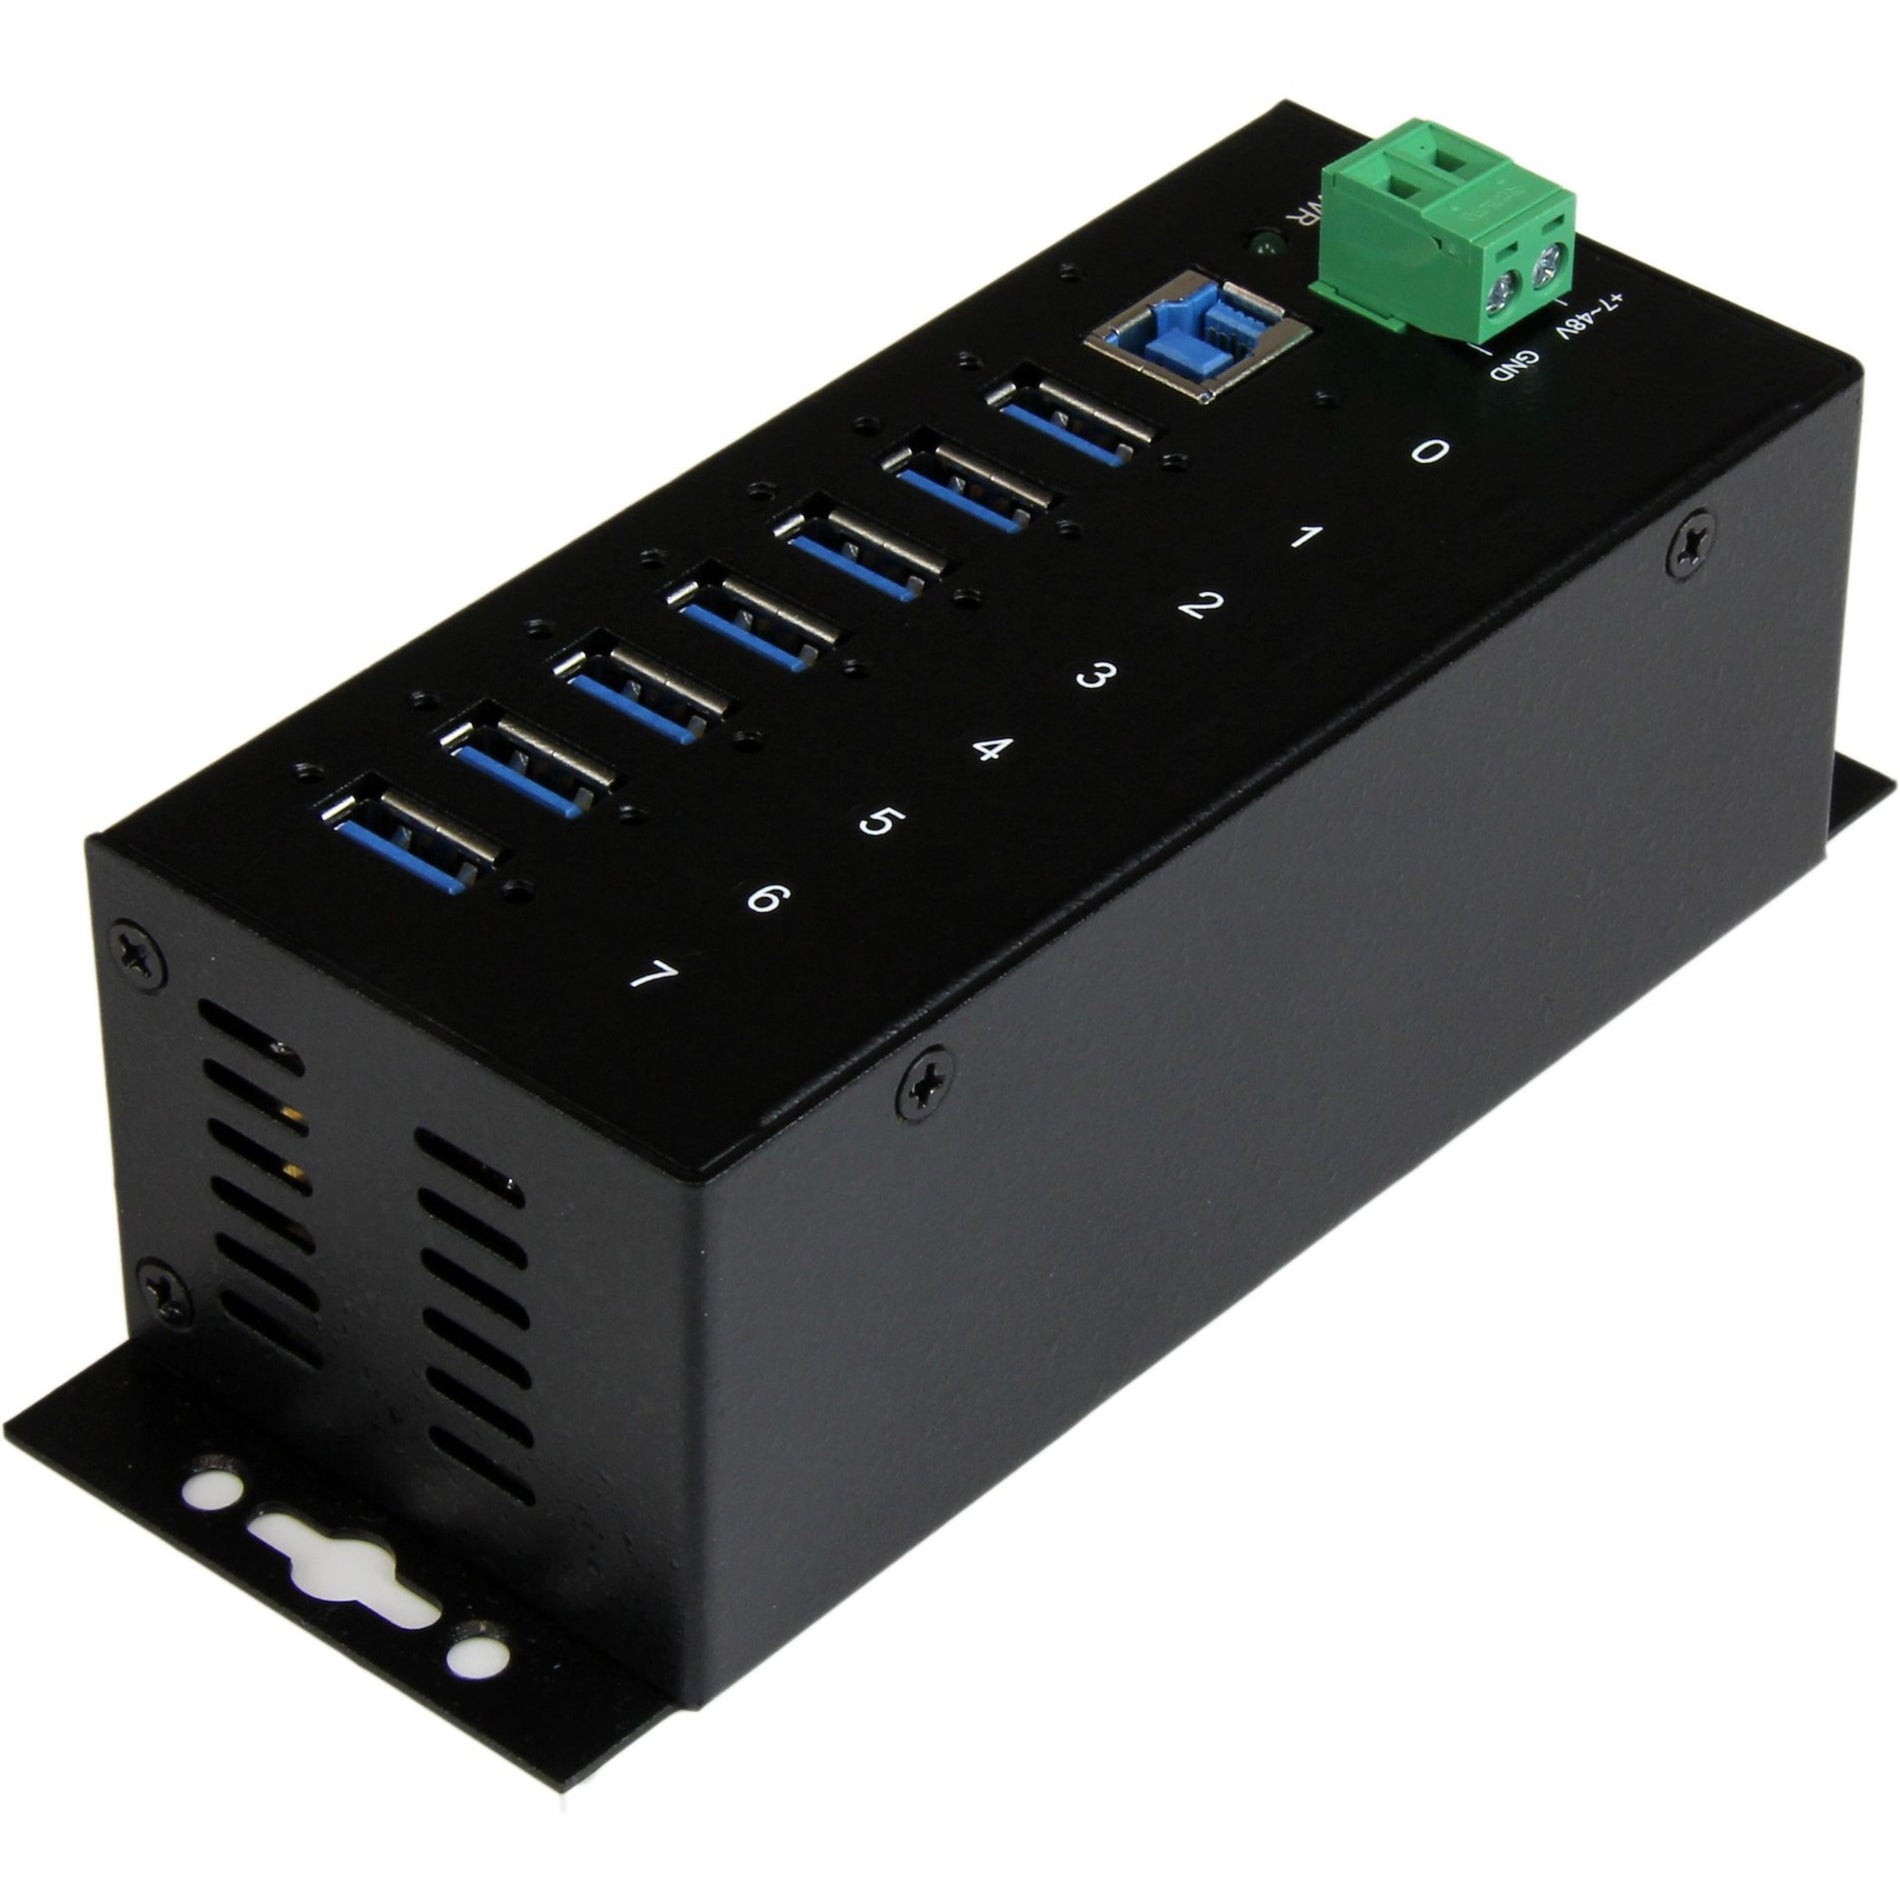 StarTech.com ST7300USBME 7 Port Industrial USB 3.0 Hub with ESD, TAA Compliant, RoHS Certified